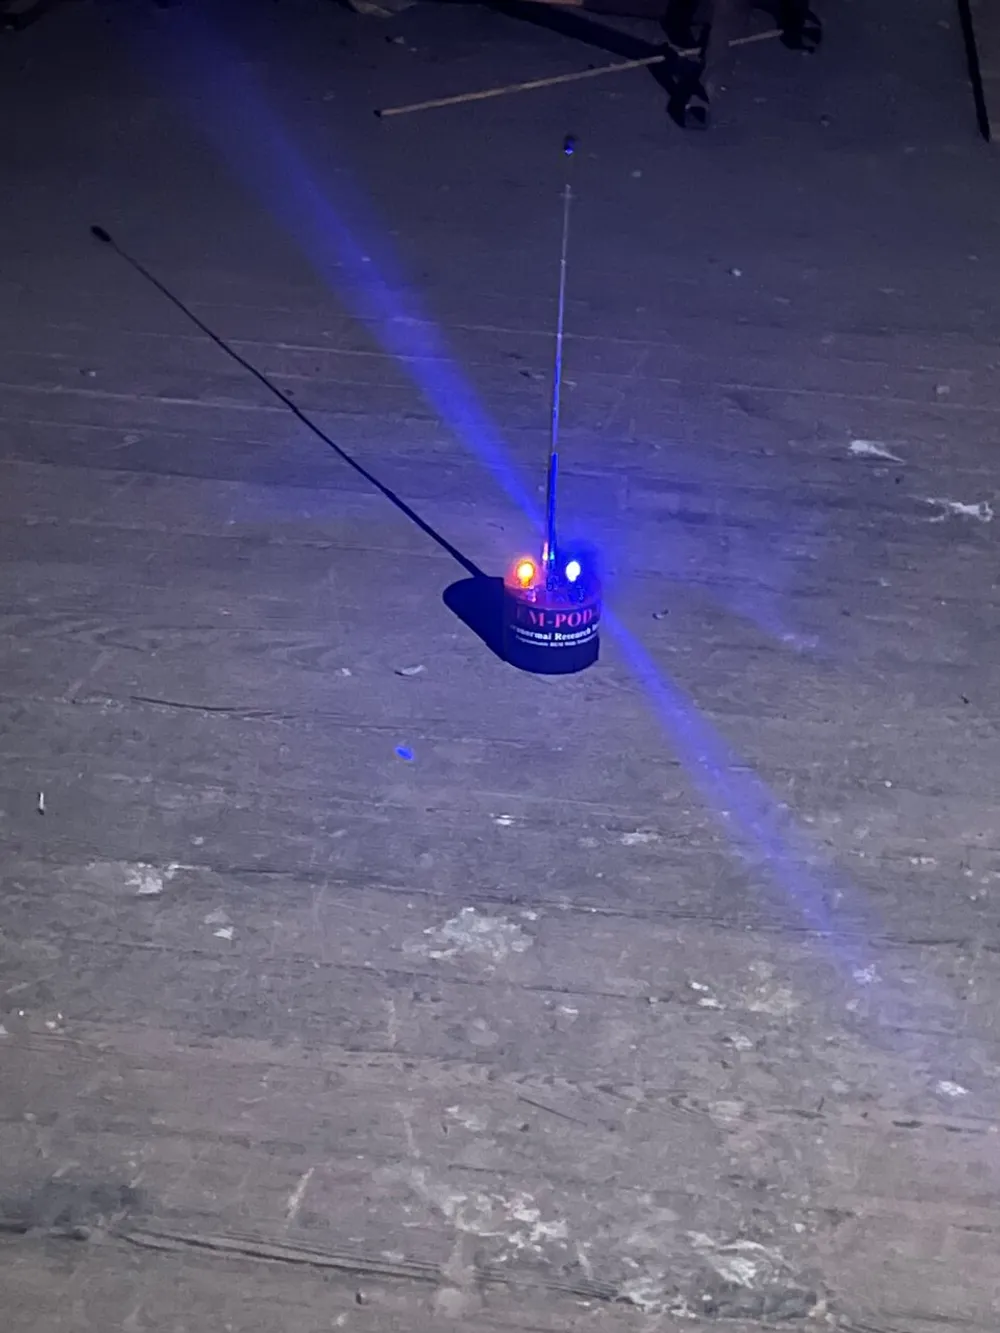 This image shows a small robotic device with flashing red and blue lights on a wooden floor projecting a blue light beam